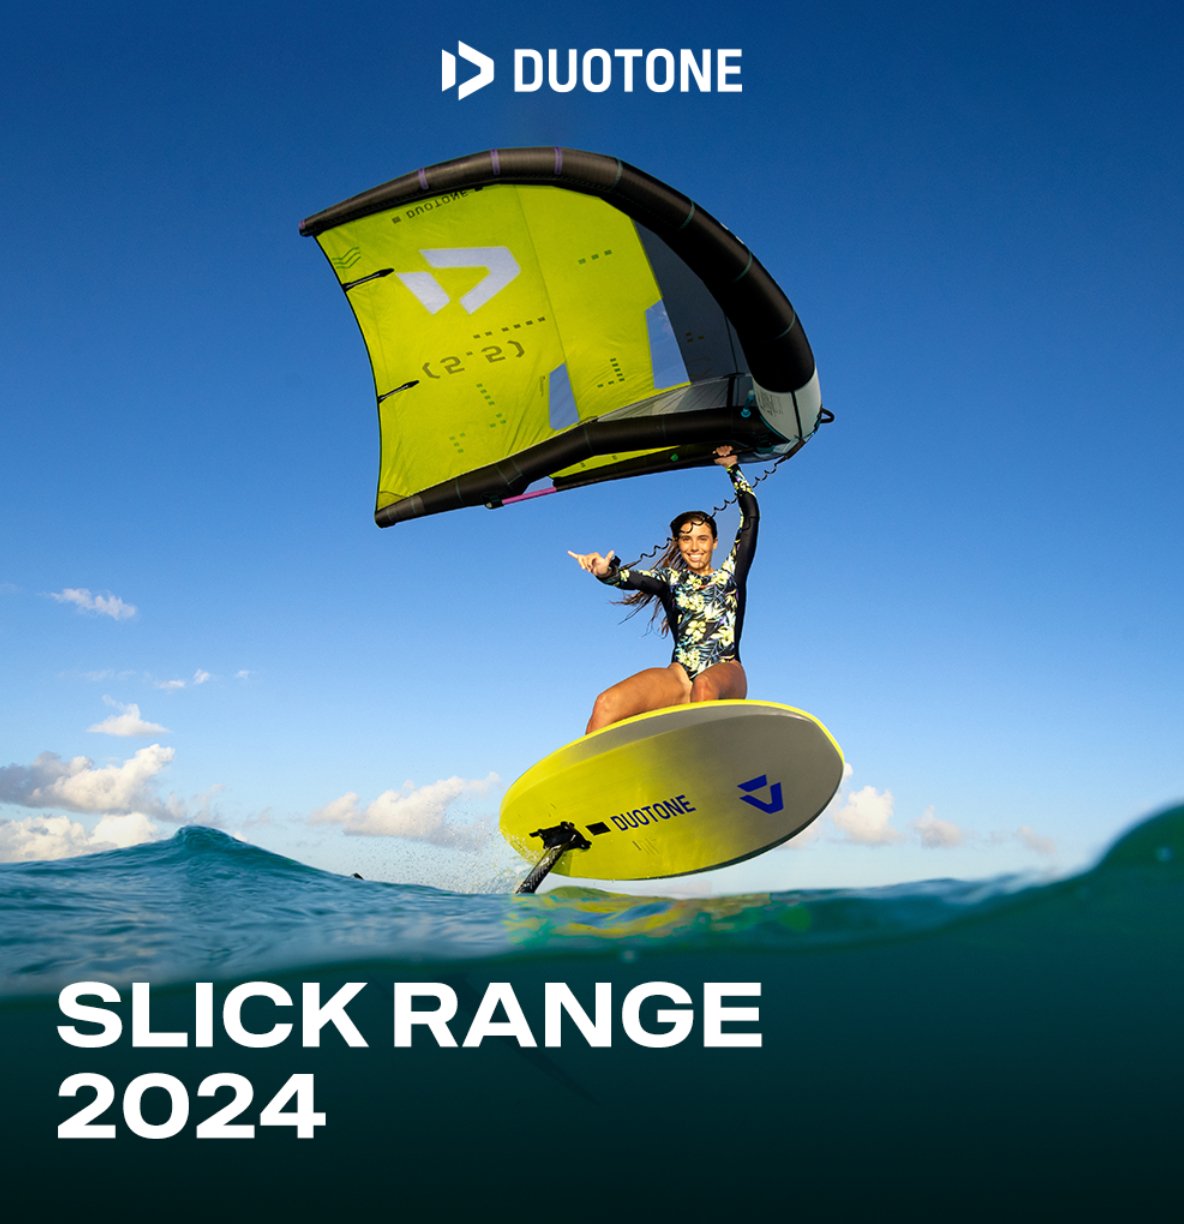 Duotone Foilwing New 2024 Slick Range - What is the difference? - Worthing Watersports